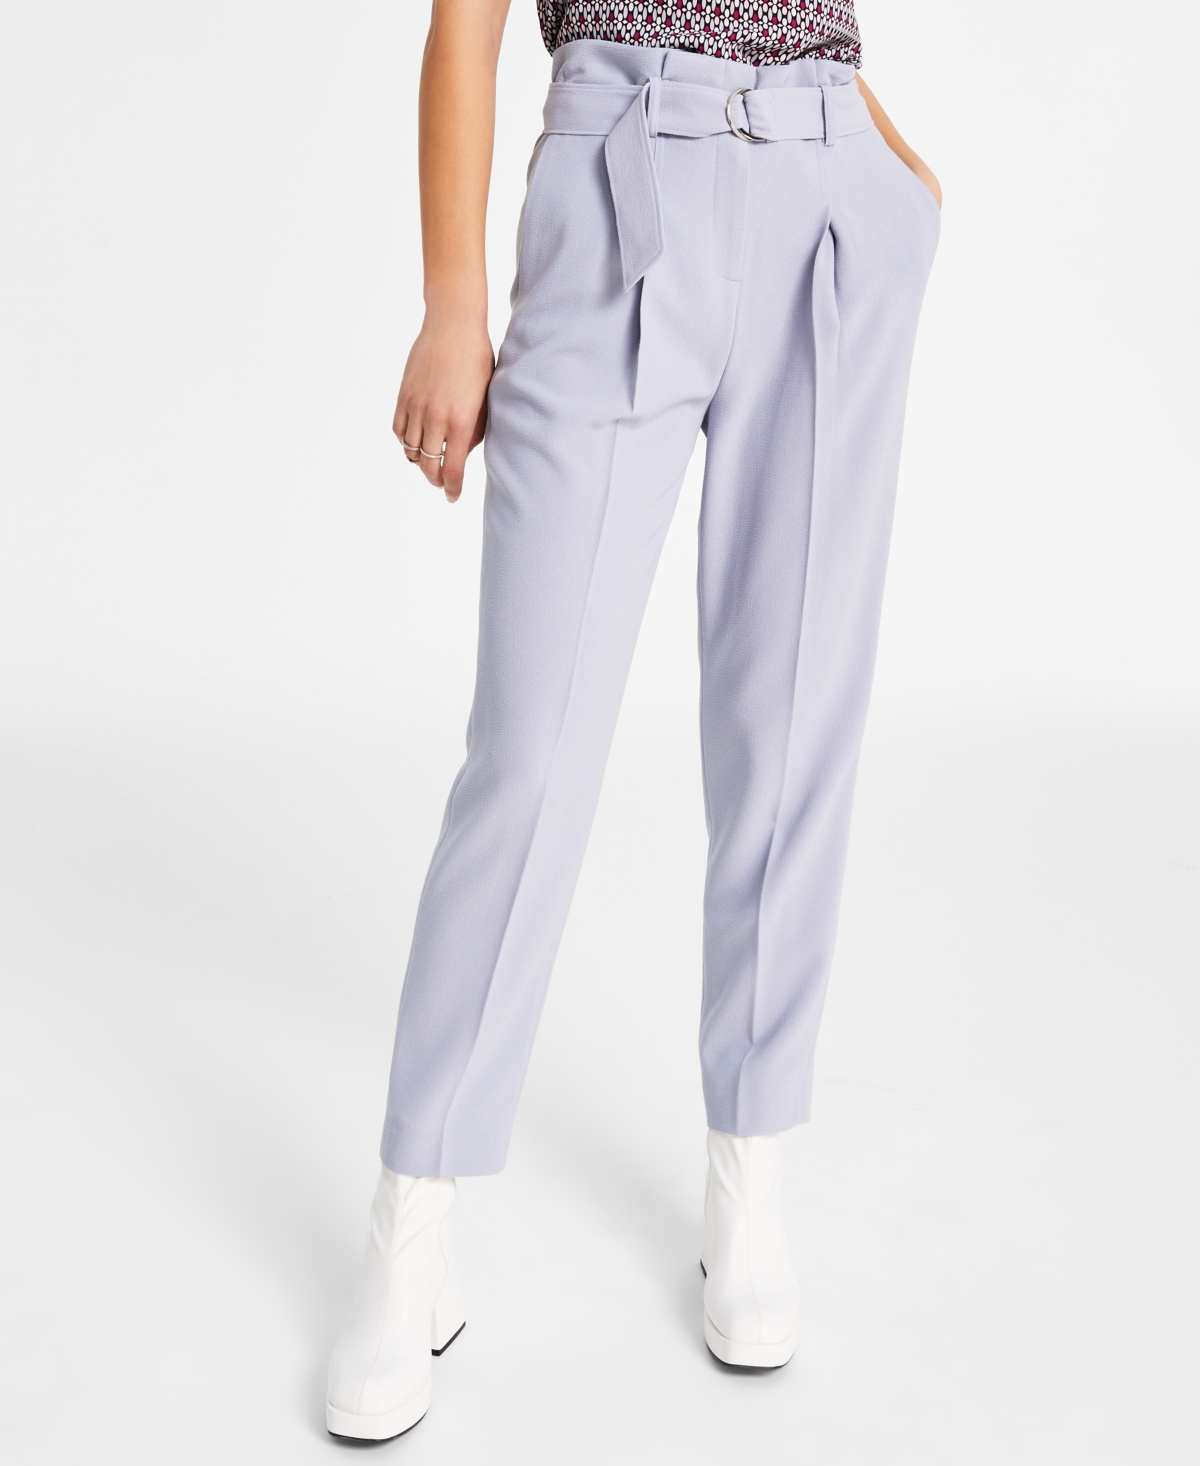  Bar Iii Women's Belted Textured Crepe Pants, Created for Macy's